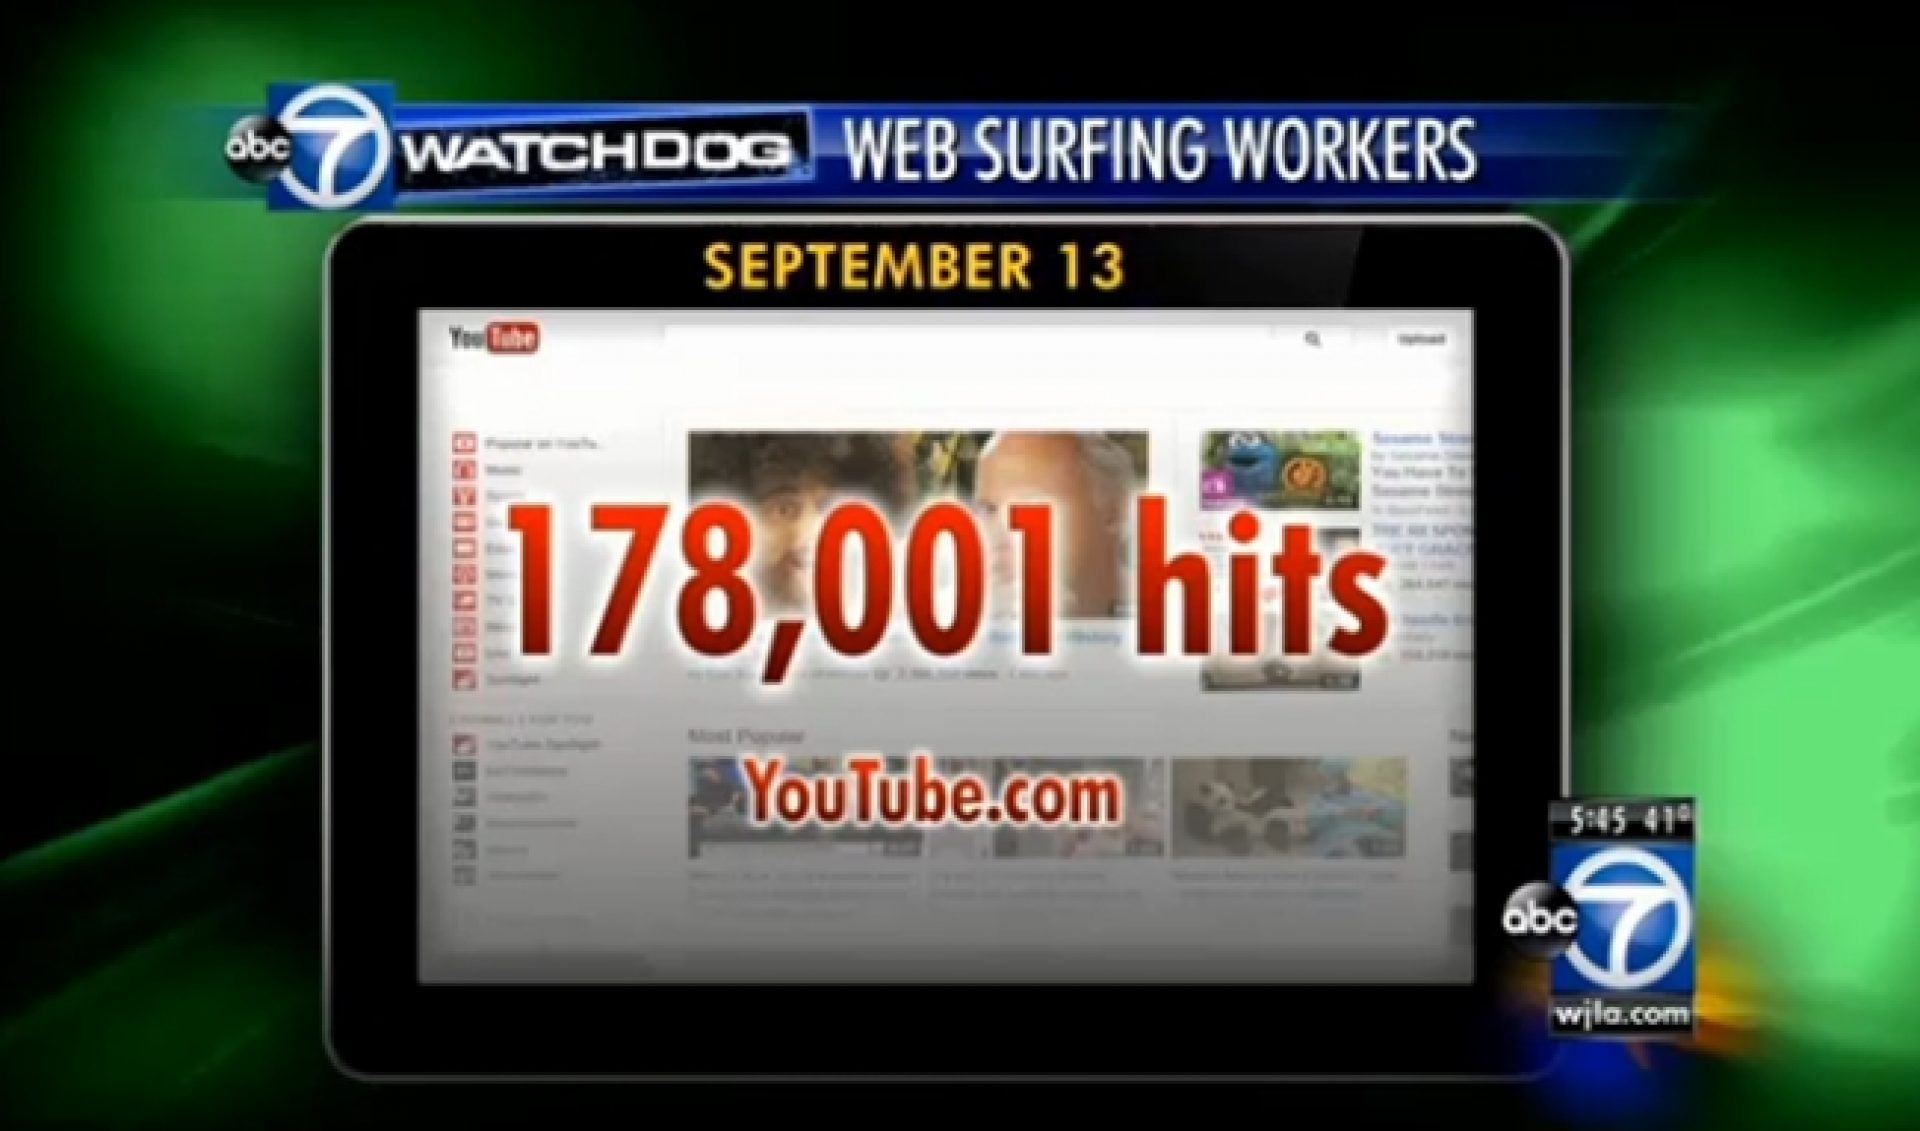 Government Employees Went To YouTube 178,000 Times In One Day